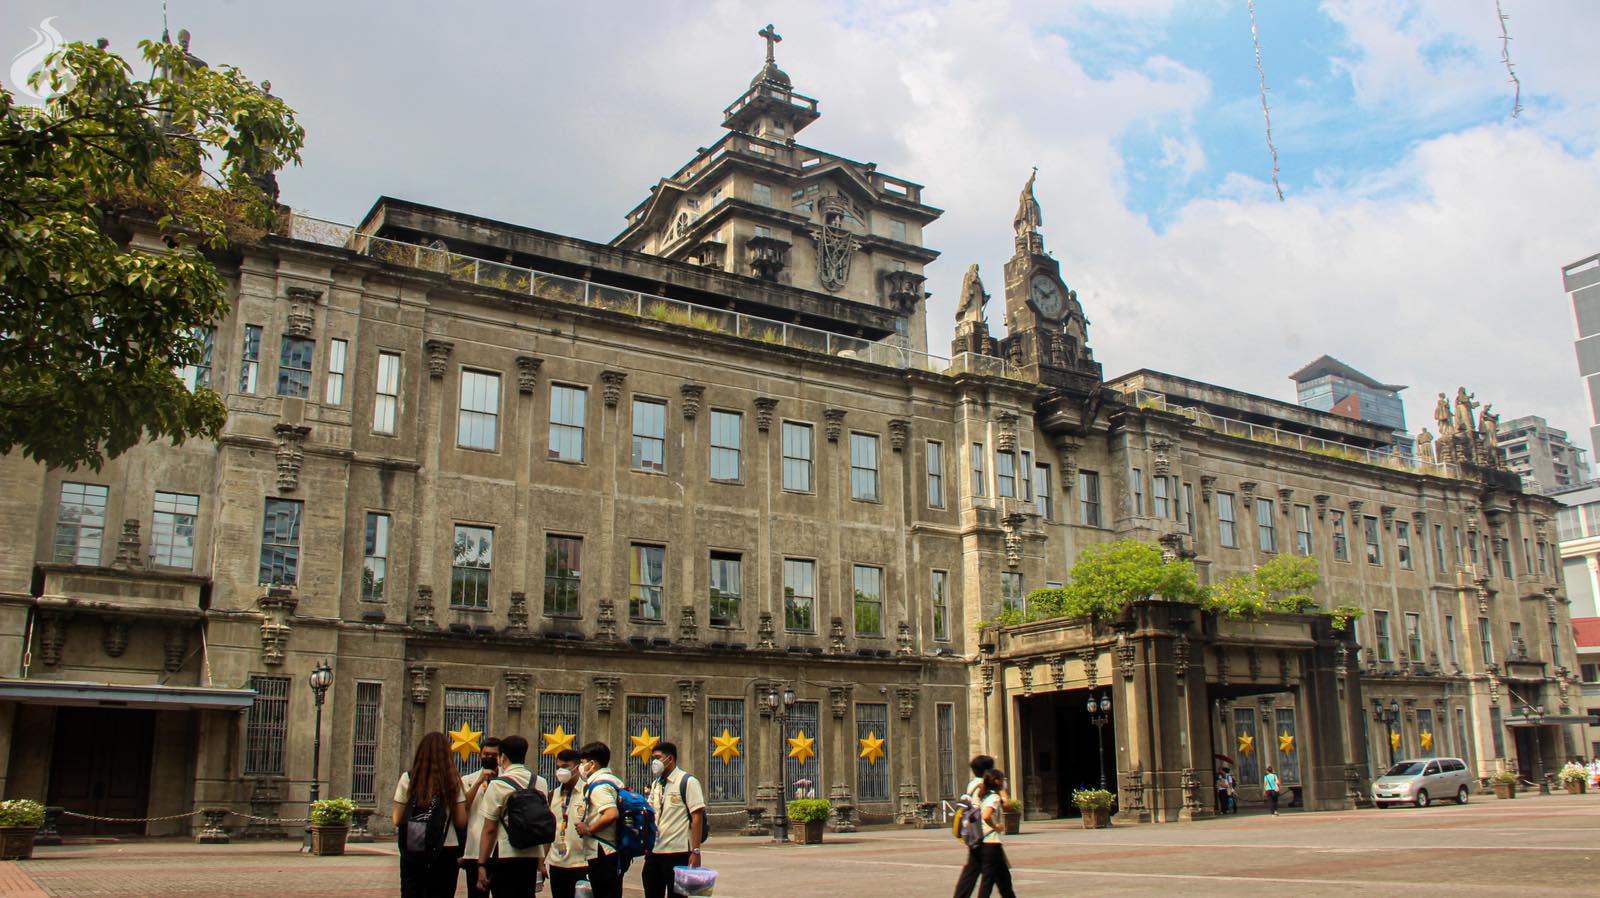 UST alumni card applicants hit nearly 10,000 this year